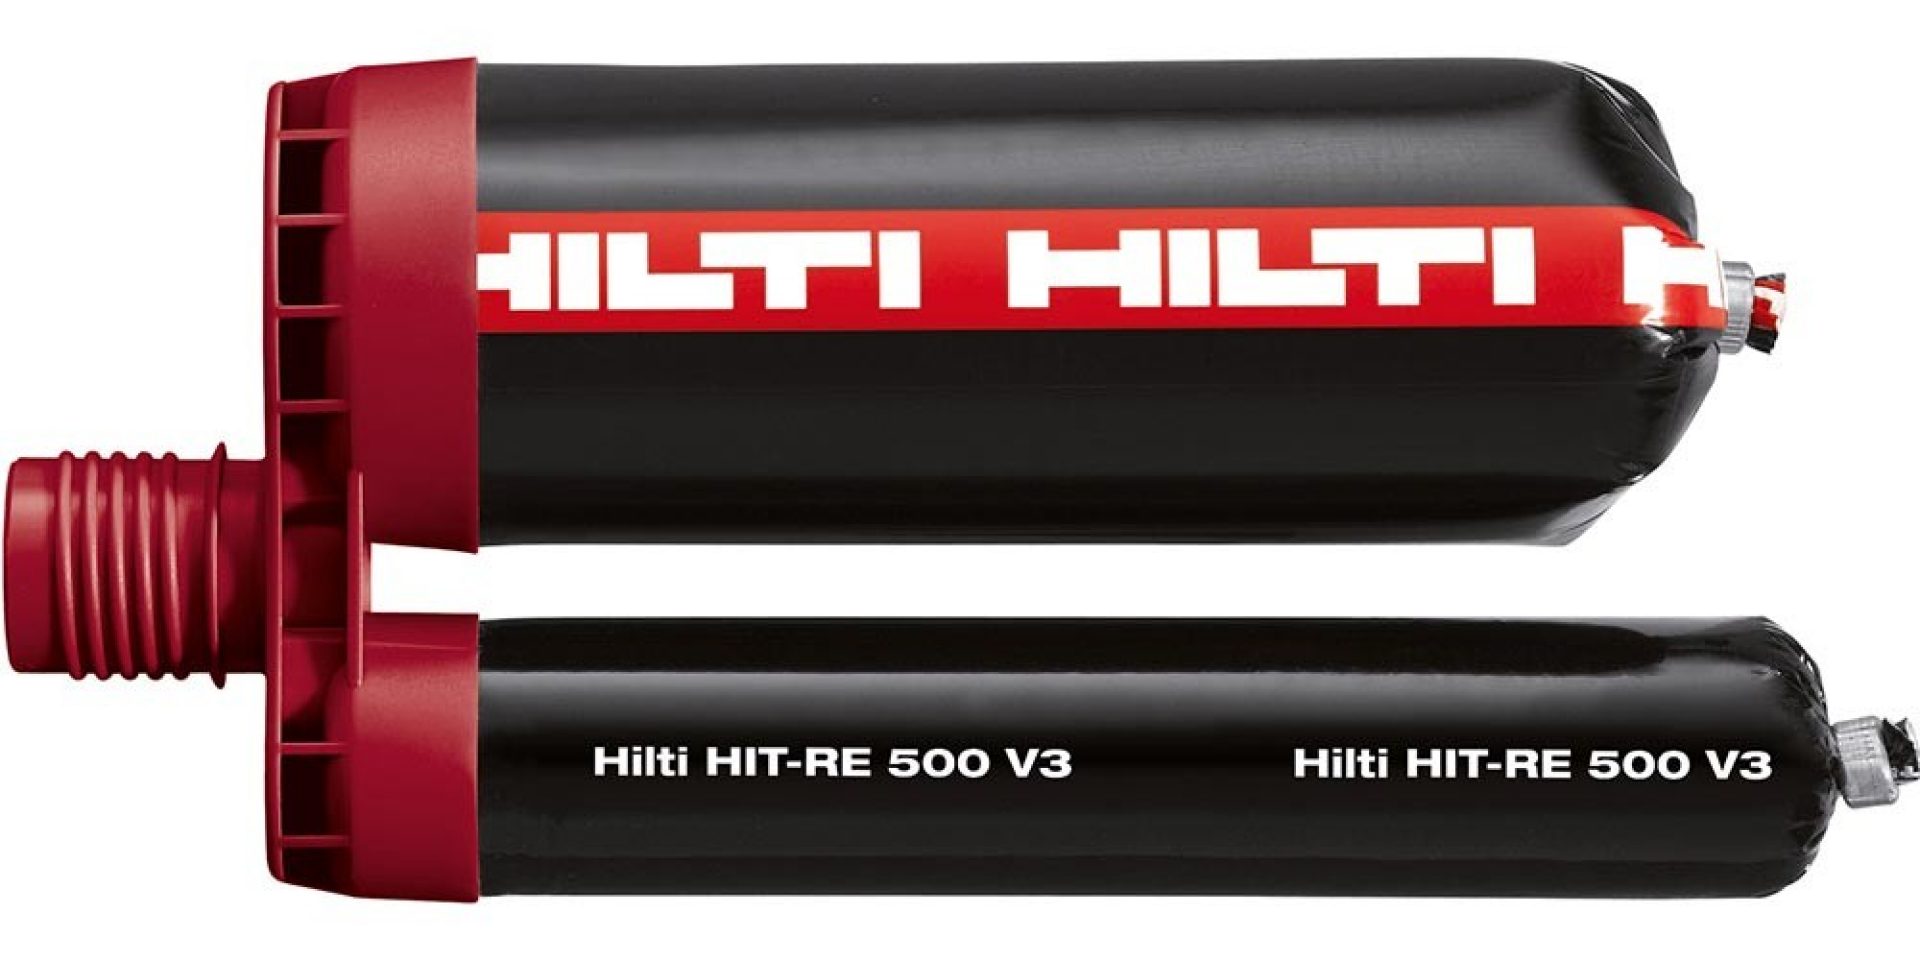 Hilti injectable mortar HIT-RE 500 V3